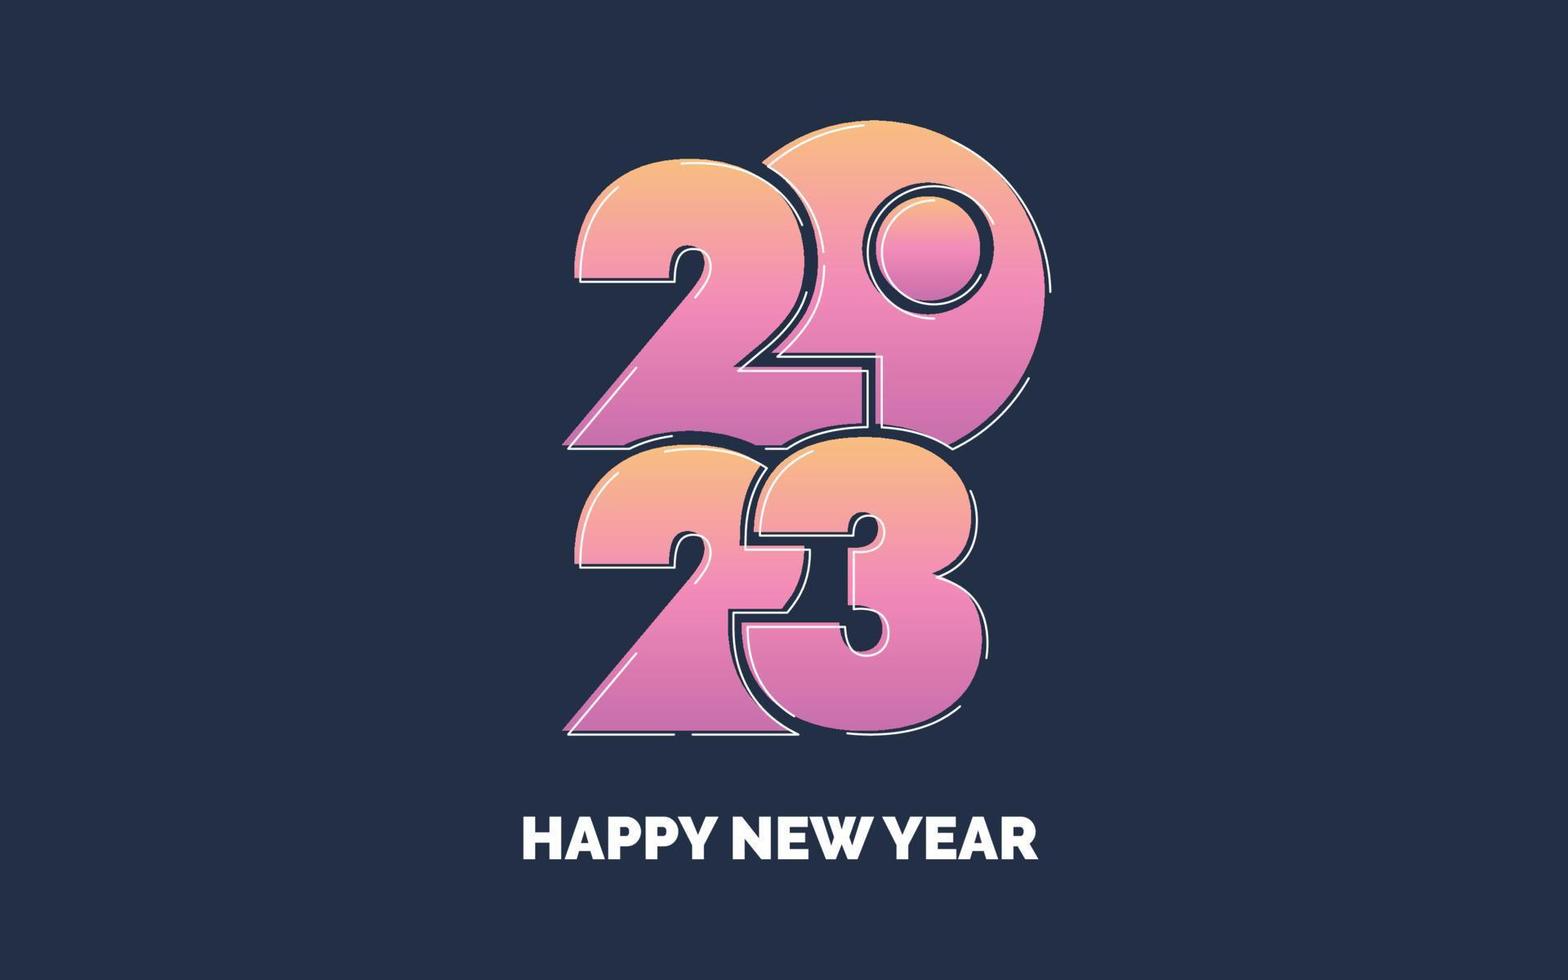 Celebrate the New Year in style with this vector background